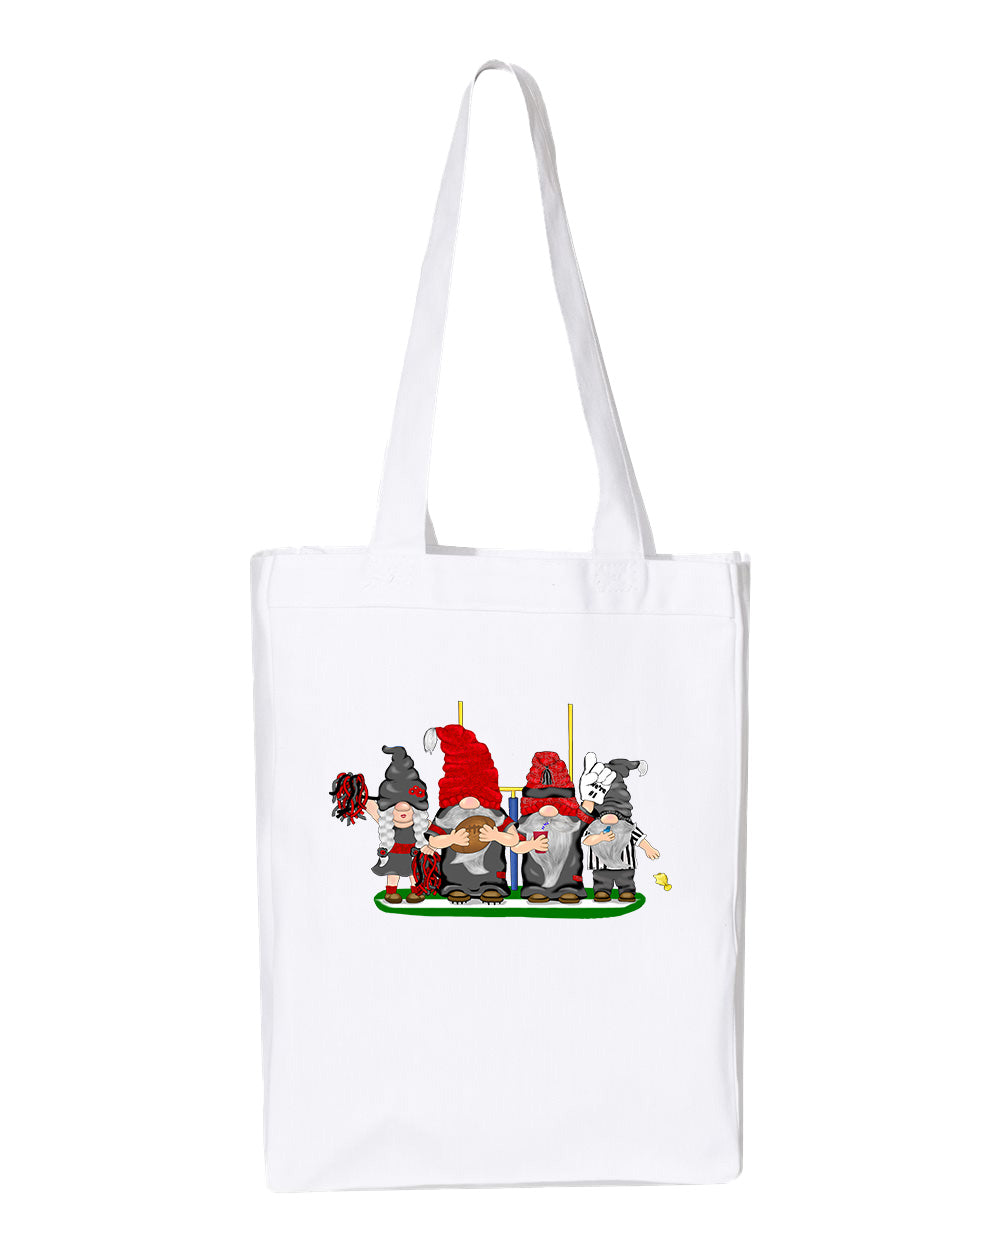 Black & Red Football Gnomes  (similar to Tampa Bay) on Gusset Tote